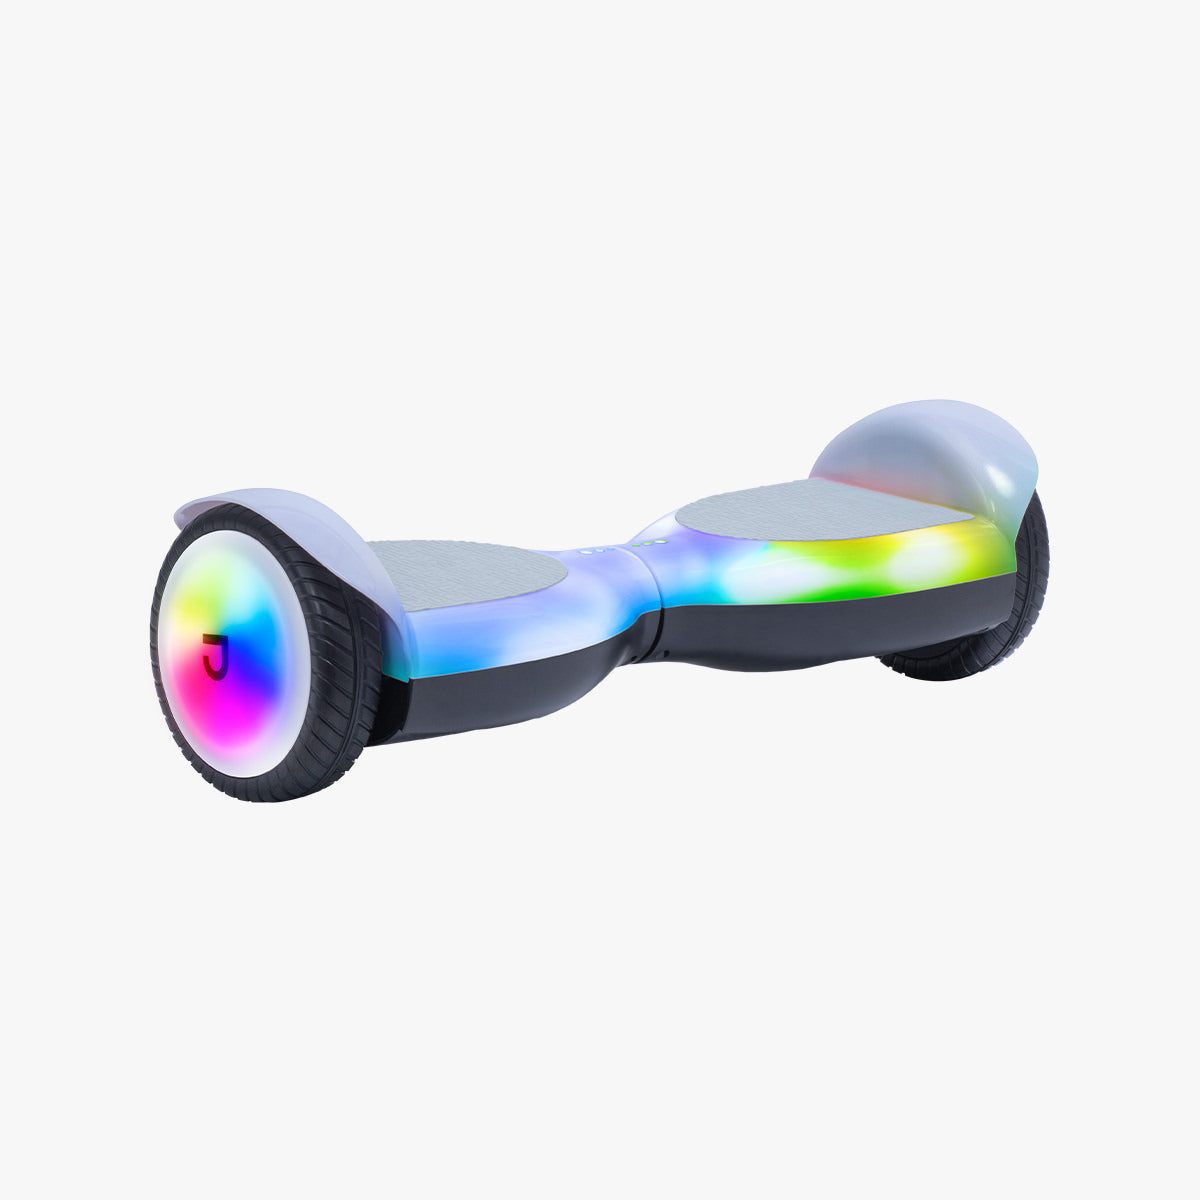 front view of the Plasma X hoverboard angled to the left